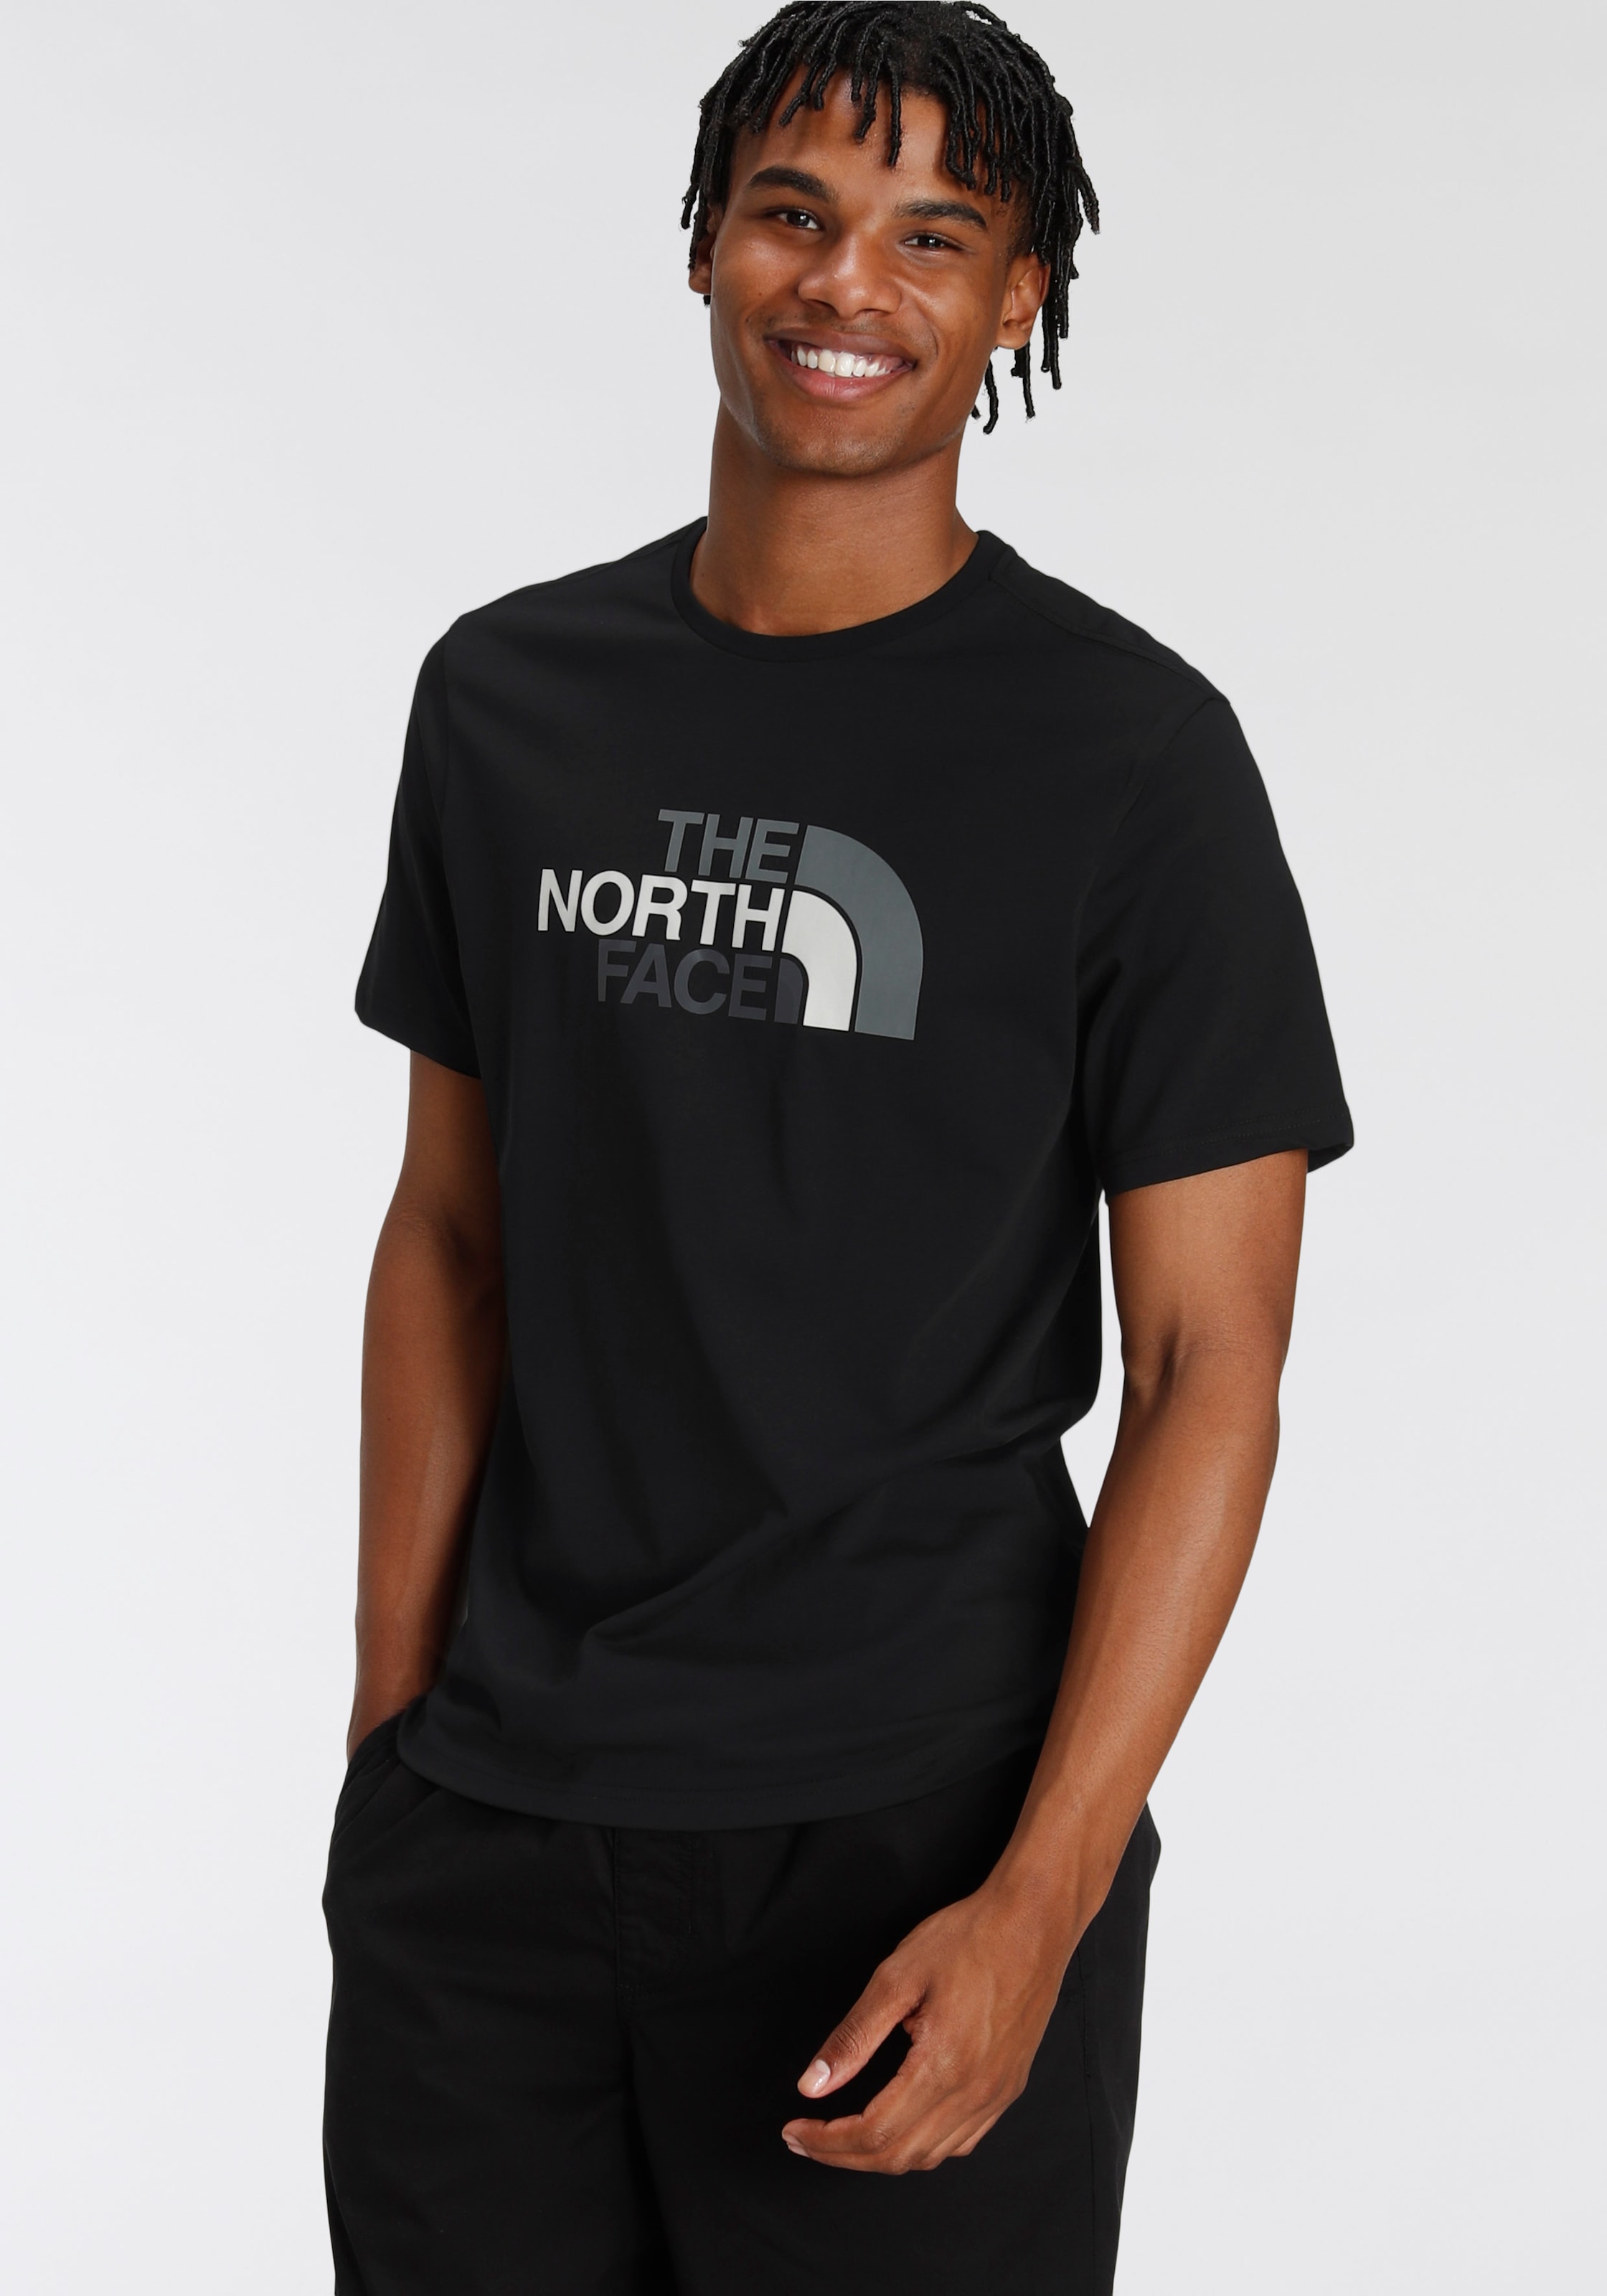 The North Face T-Shirt »EASY kaufen OTTO Großer Logo-Print bei online TEE«